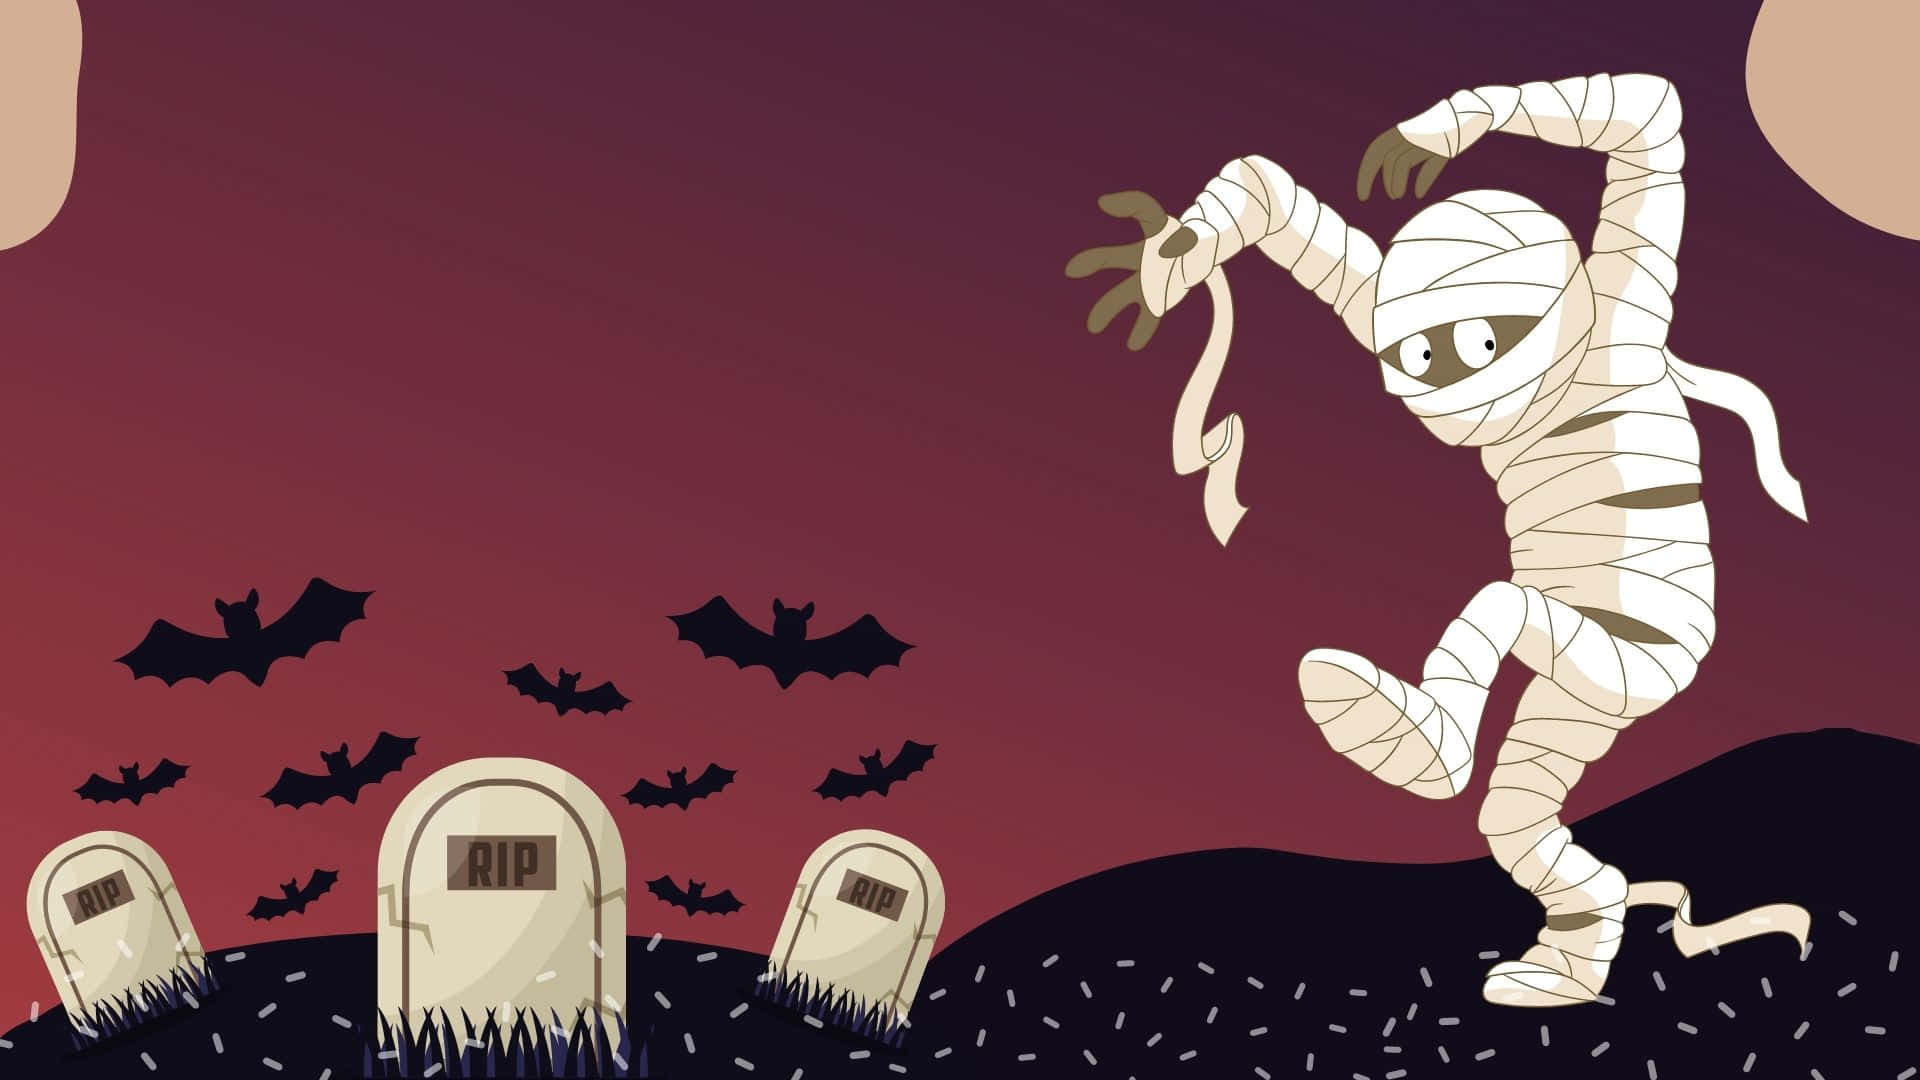 Dress up for Halloween in a stylish mummy costume Wallpaper